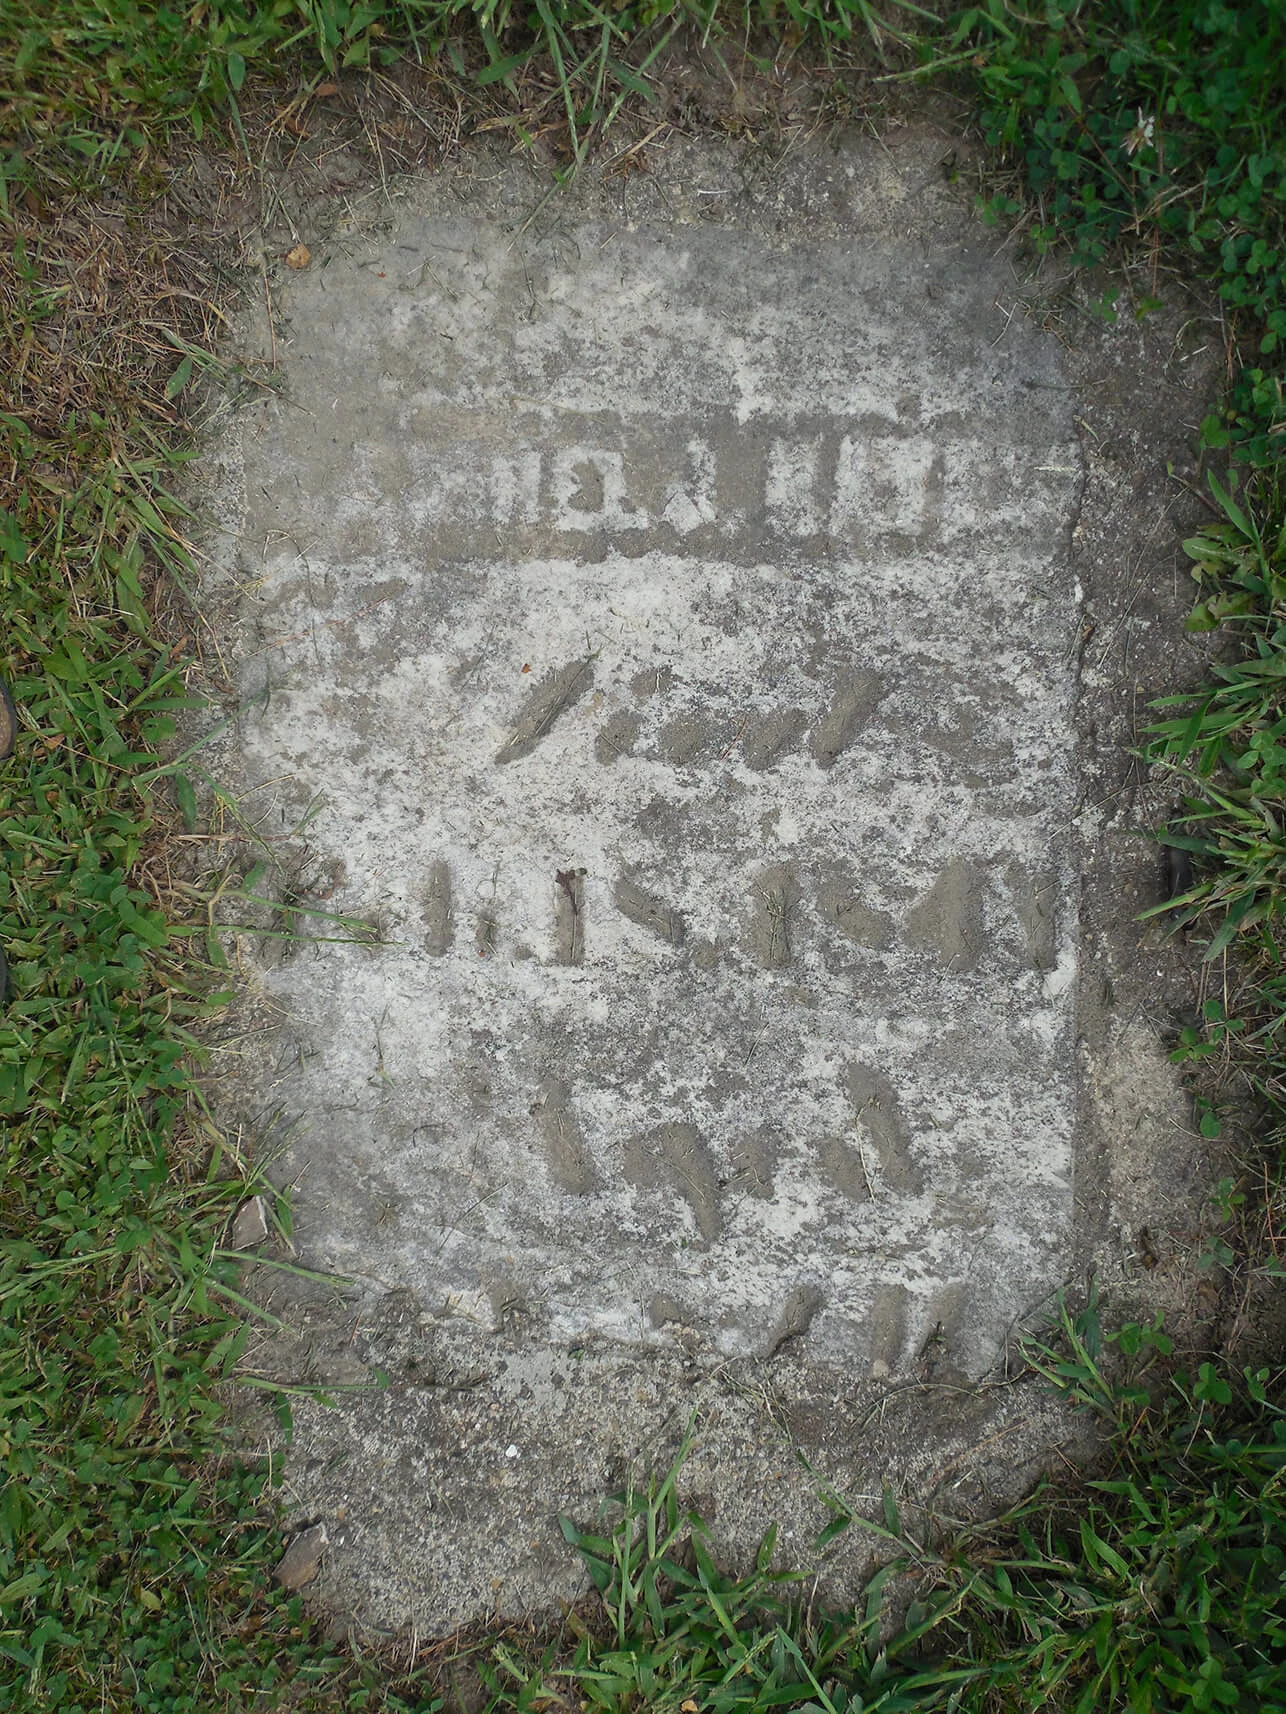 Worn flat headstone surrounded by grass.